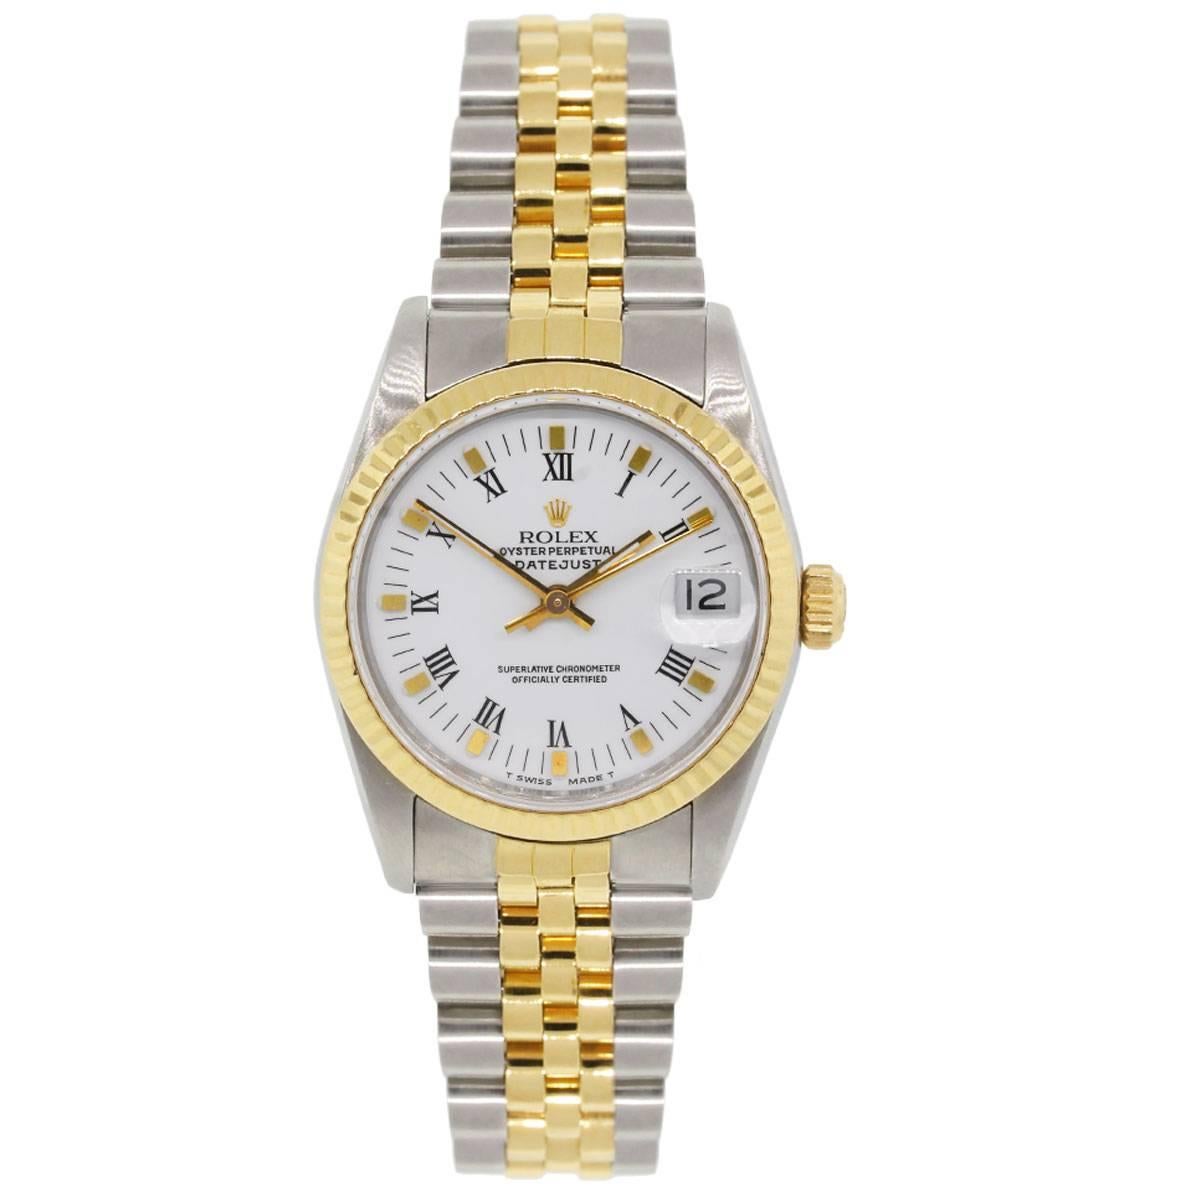 Brand: Rolex
MPN: 68273
Model: Datejust (midsize)
Case Material: Stainless steel
Crystal: Sapphire
Case Diameter: 31mm
Bezel: Fixed Fluted bezel
Dial: White roman dial with date at 3 o’clock
Bracelet: Two tone stainless steel and 18k yellow gold